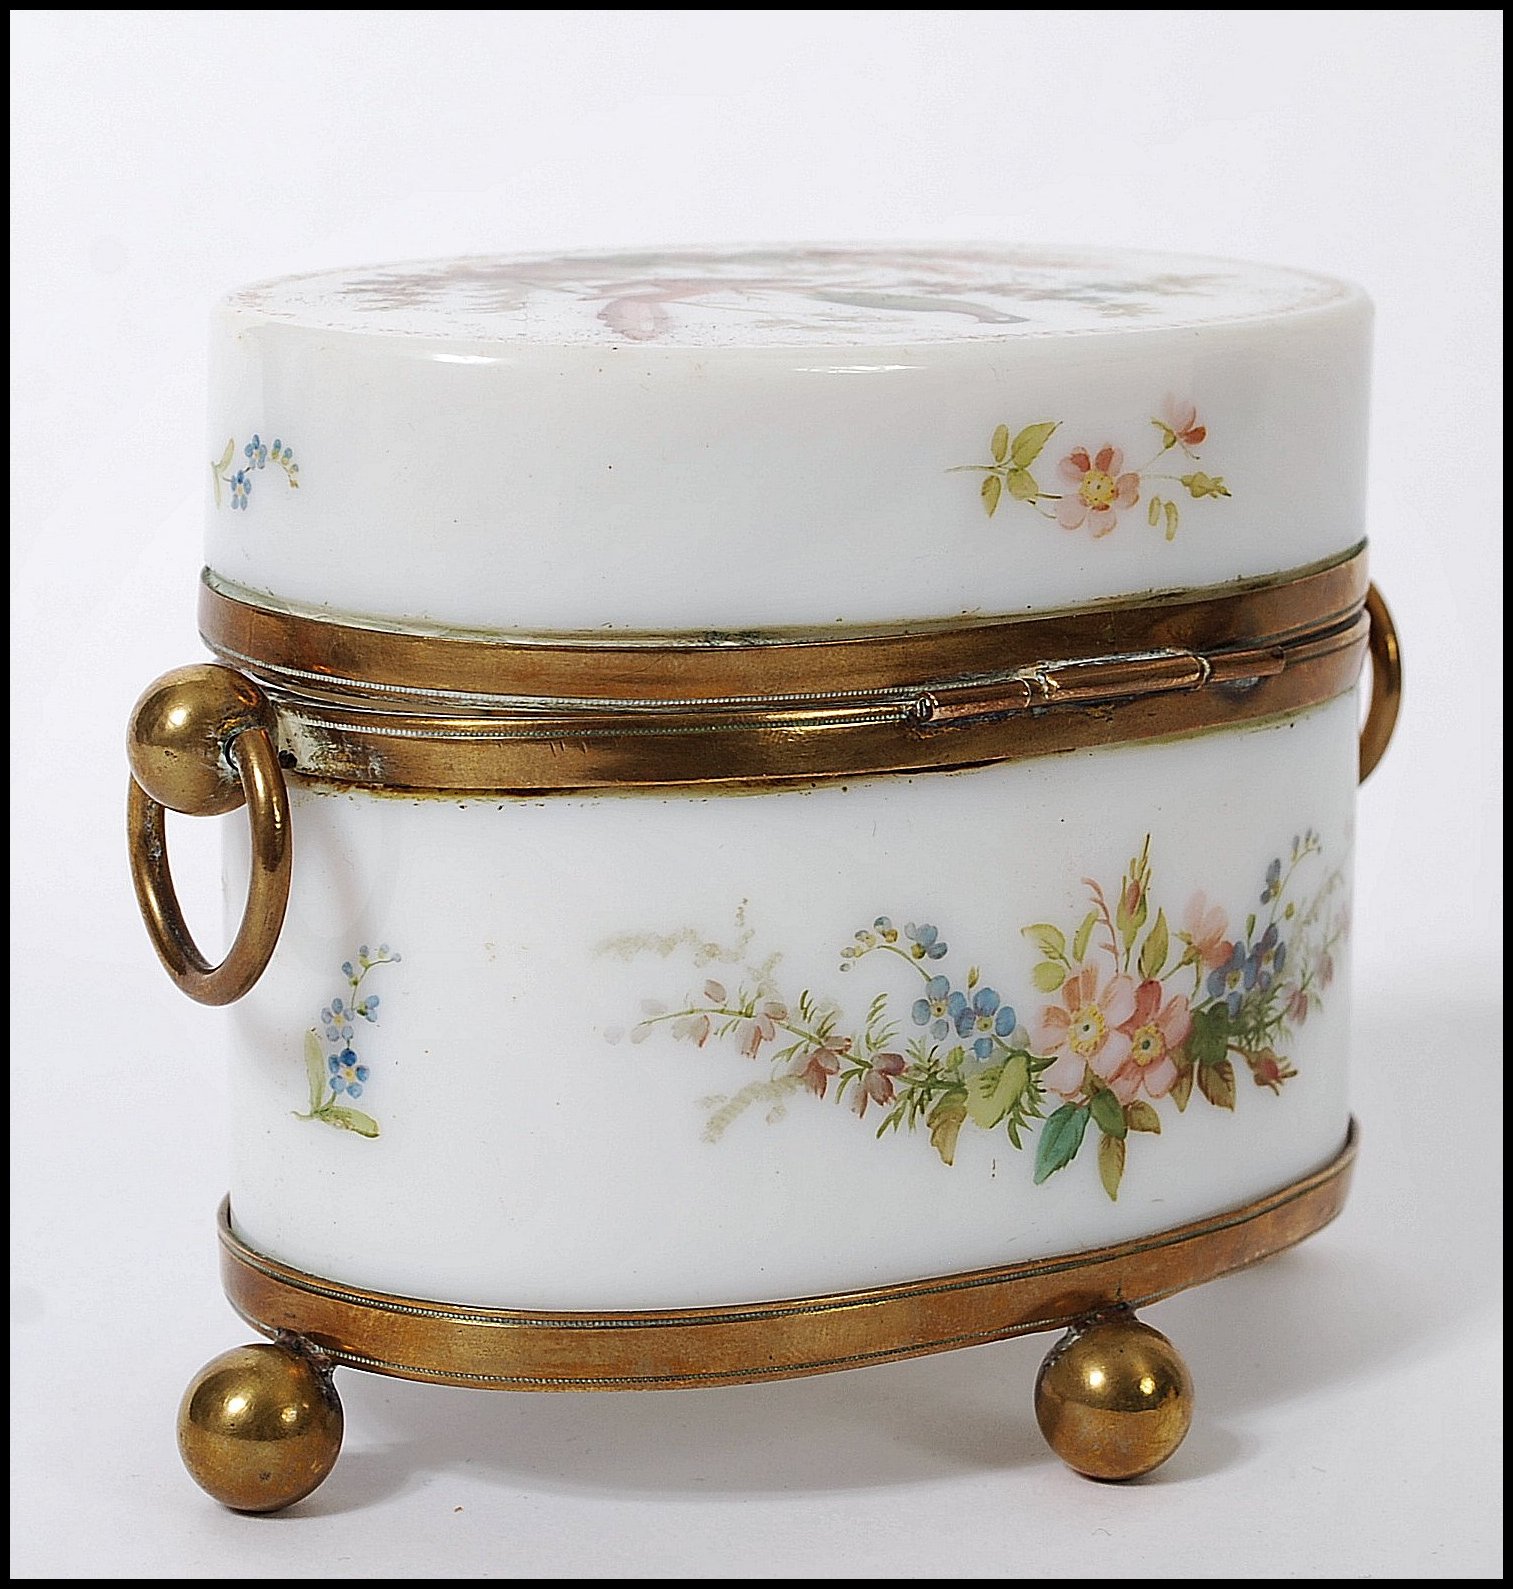 An early 19th century Continental Milch glass ( milk glass ) casket box having ormolu feet and - Image 5 of 5